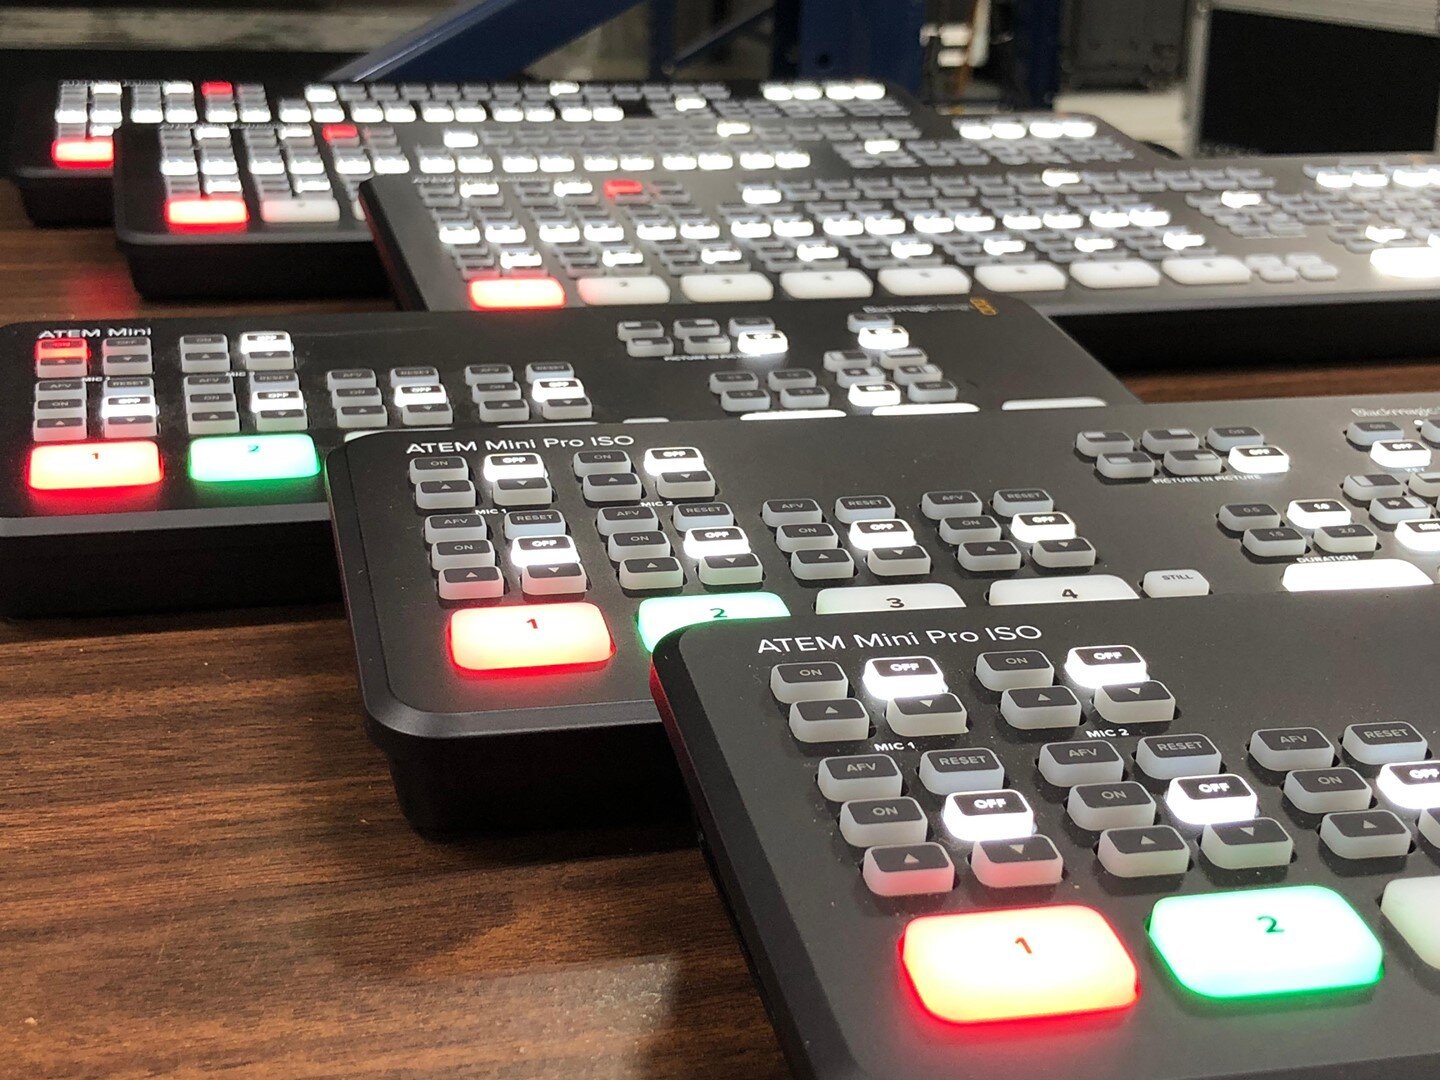 Prepping some of our switching and encoding fleet for a long stretch of virtual and hybrid events. Have questions about how to handle your webcast options? Drop me a note! 
We are flexible, adaptable and have an outstanding crew available to support 